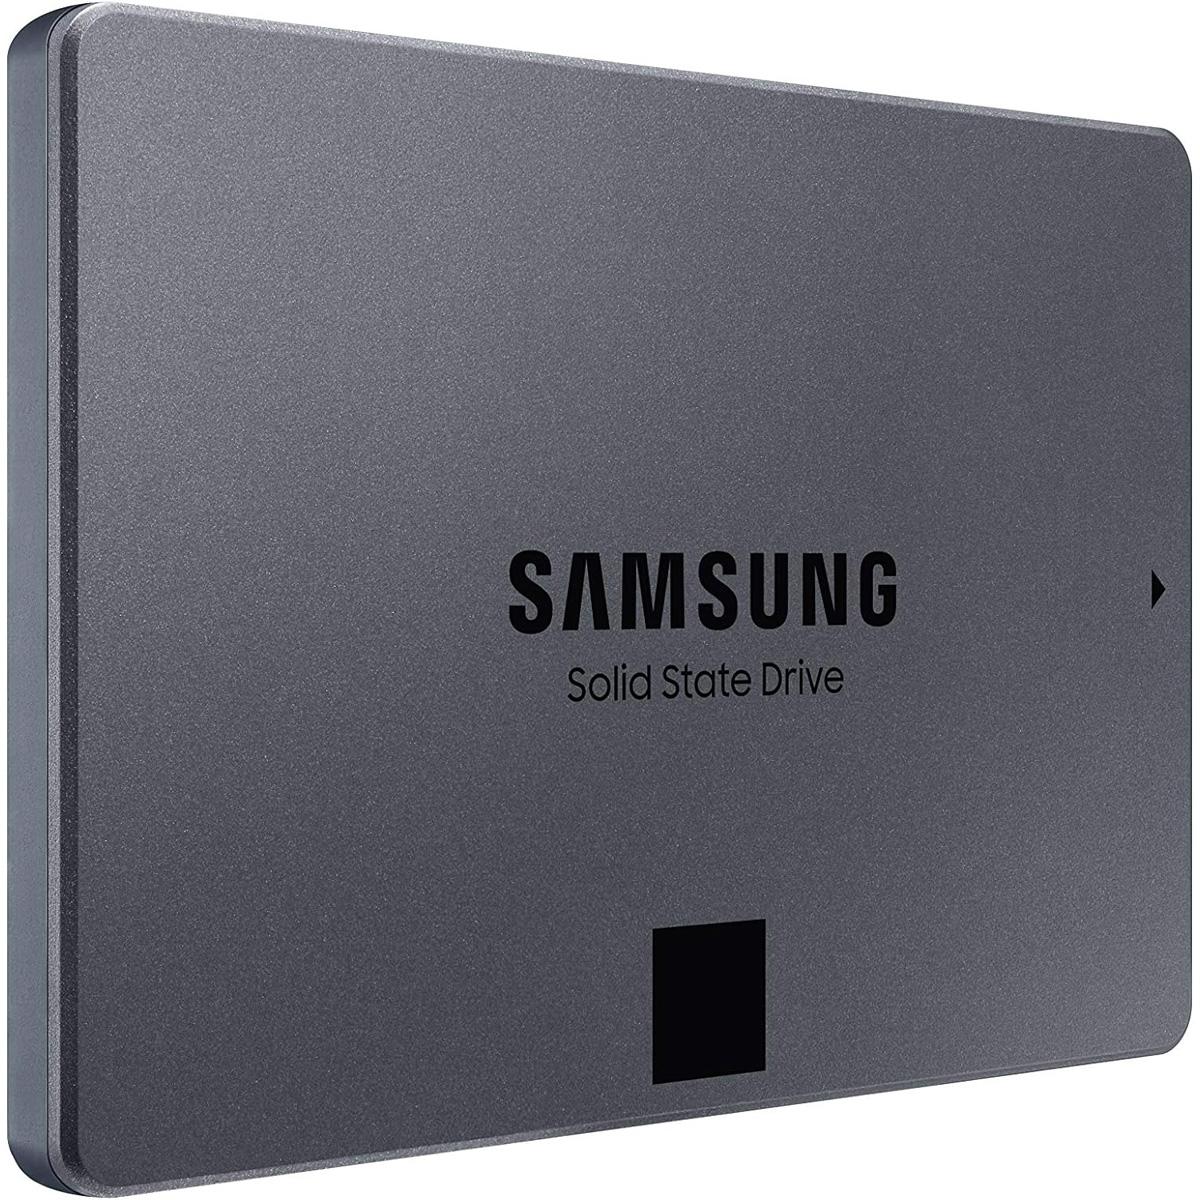 8TB Samsung 870 QVO SATA III Internal SSD Solid State Drive for $299.99 Shipped